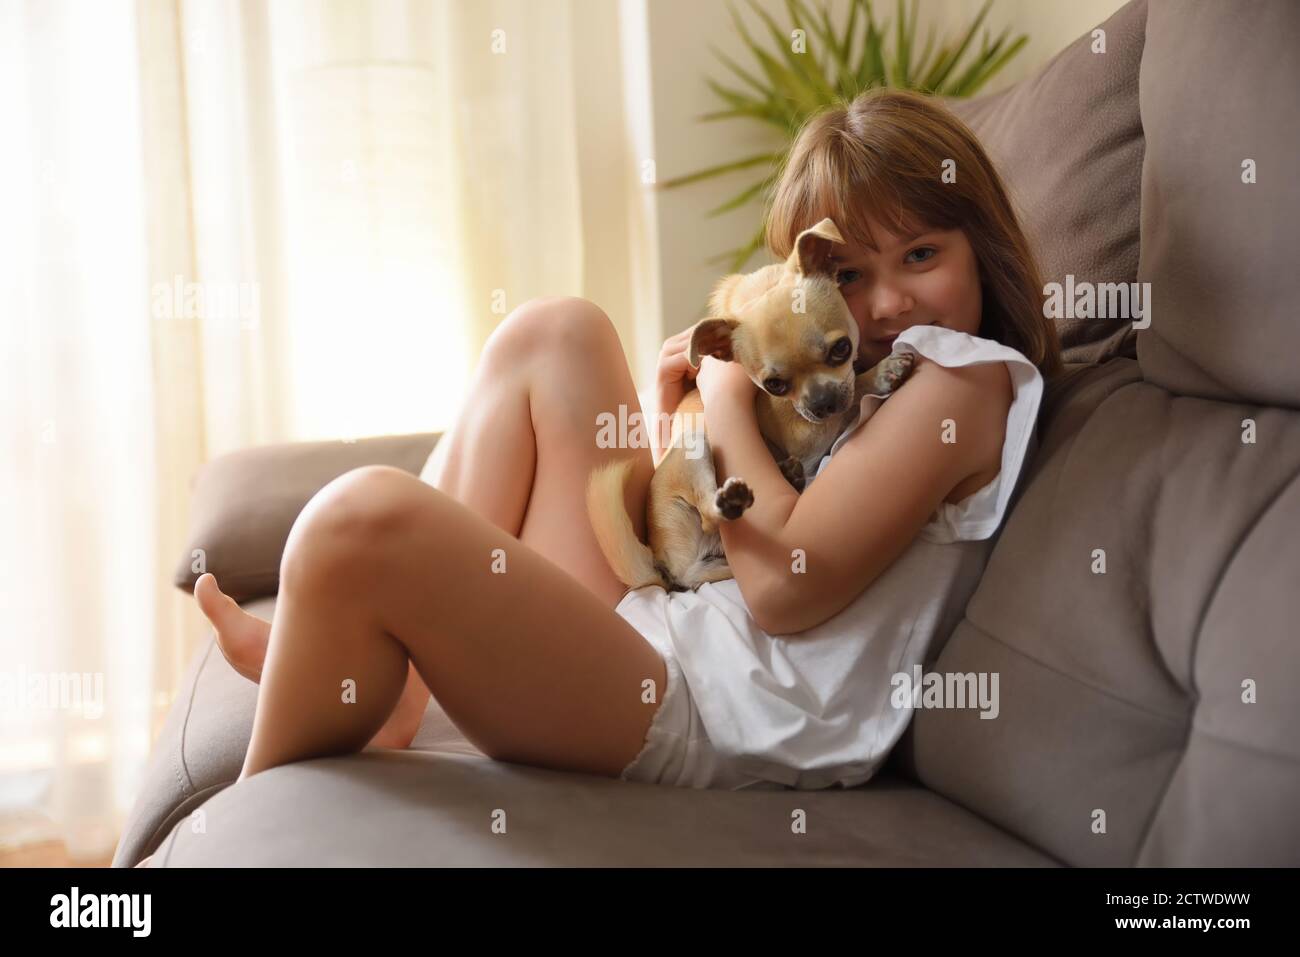 Laughing girl holding her dog affectionately on the sofa looking at camera Stock Photo